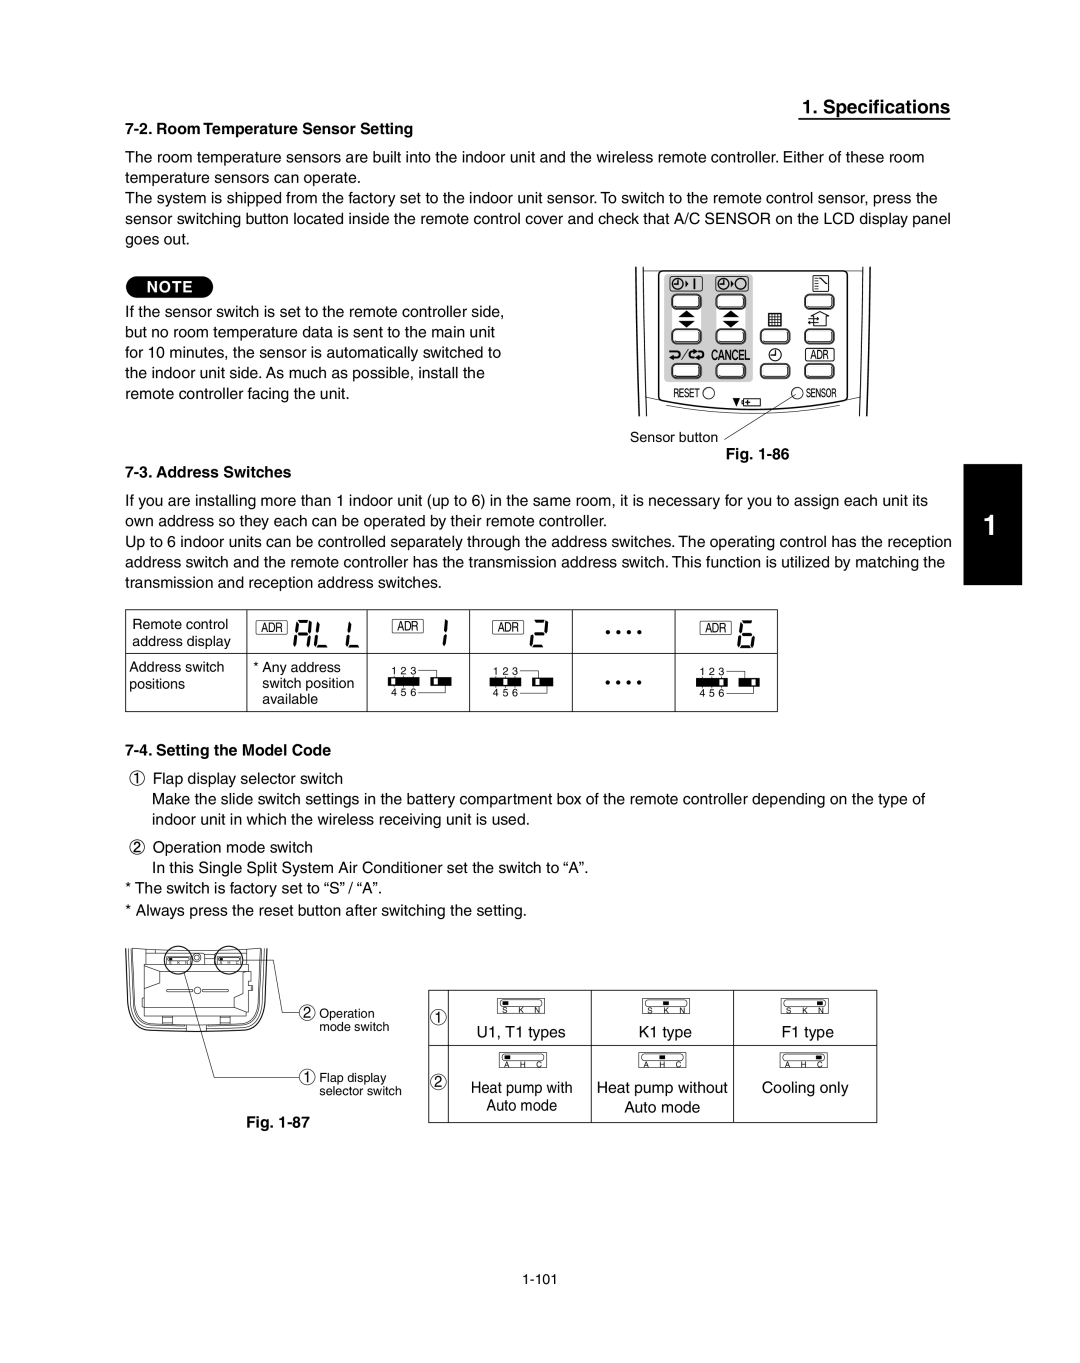 Panasonic R410A Specifications, Room Temperature Sensor Setting, 3.Address Switches, Setting the Model Code, Fig 